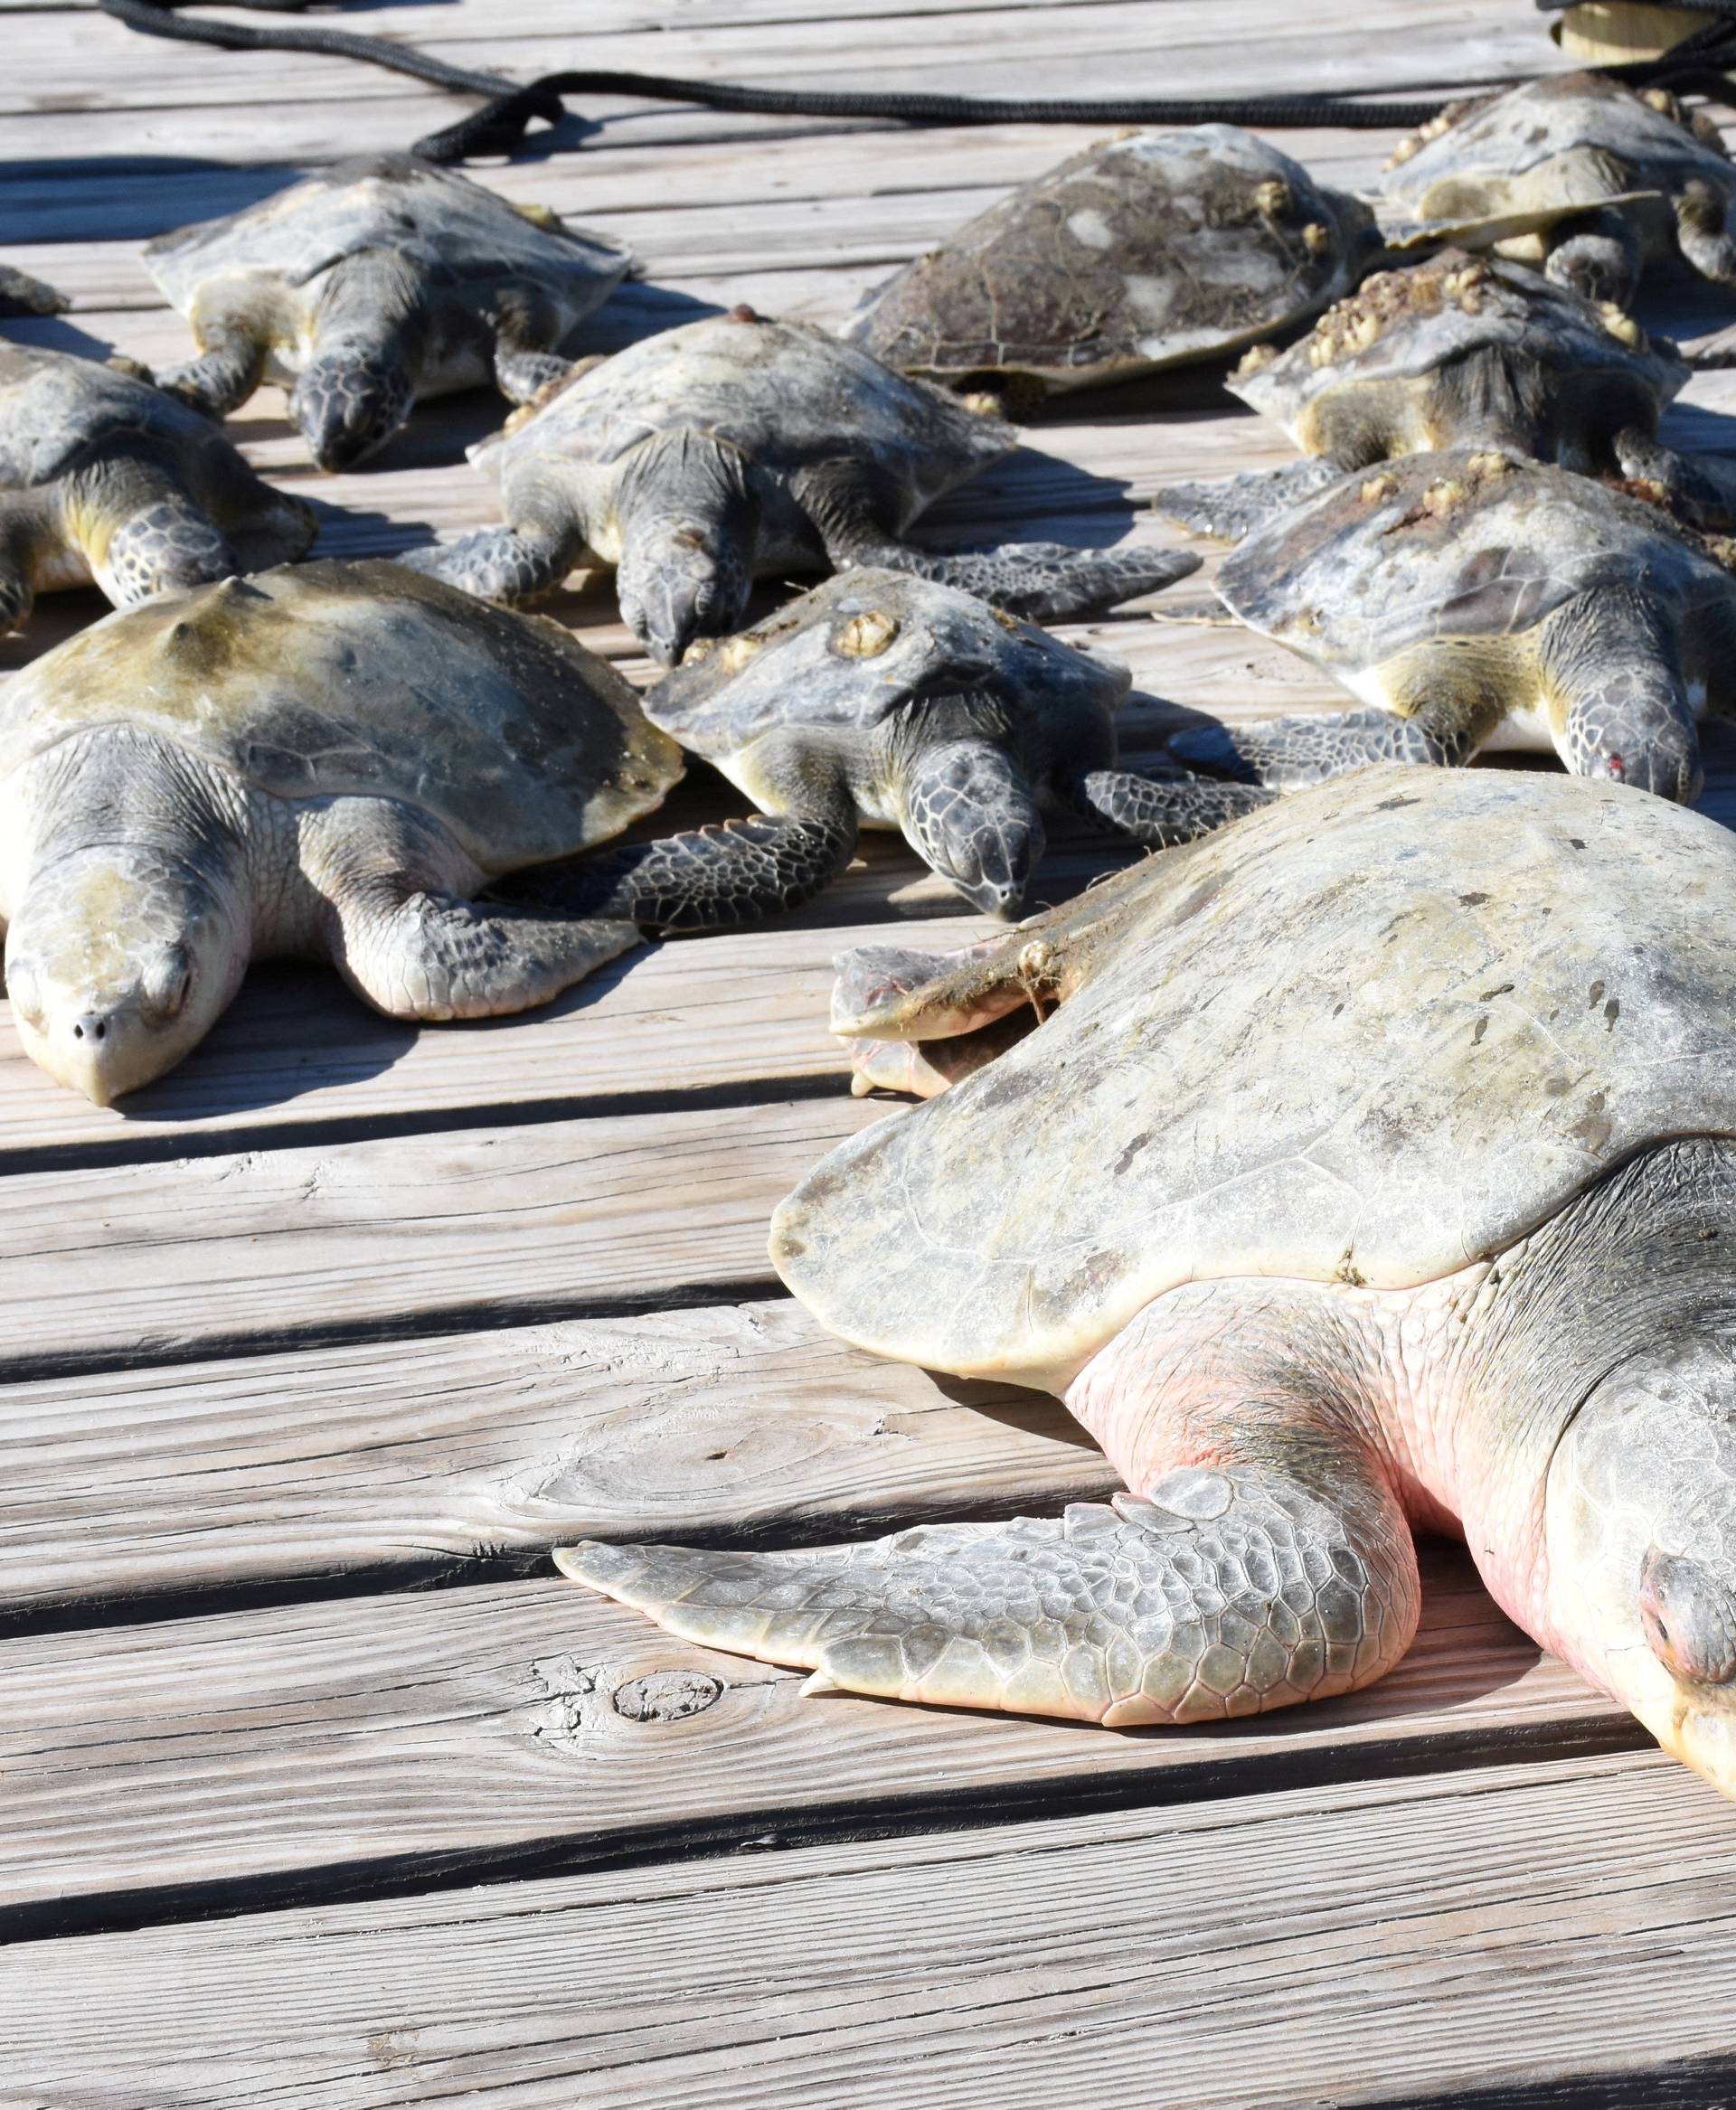 A group of cold-stunned turtles is seen after being rescued following extreme cold weather on St. Joseph Peninsula